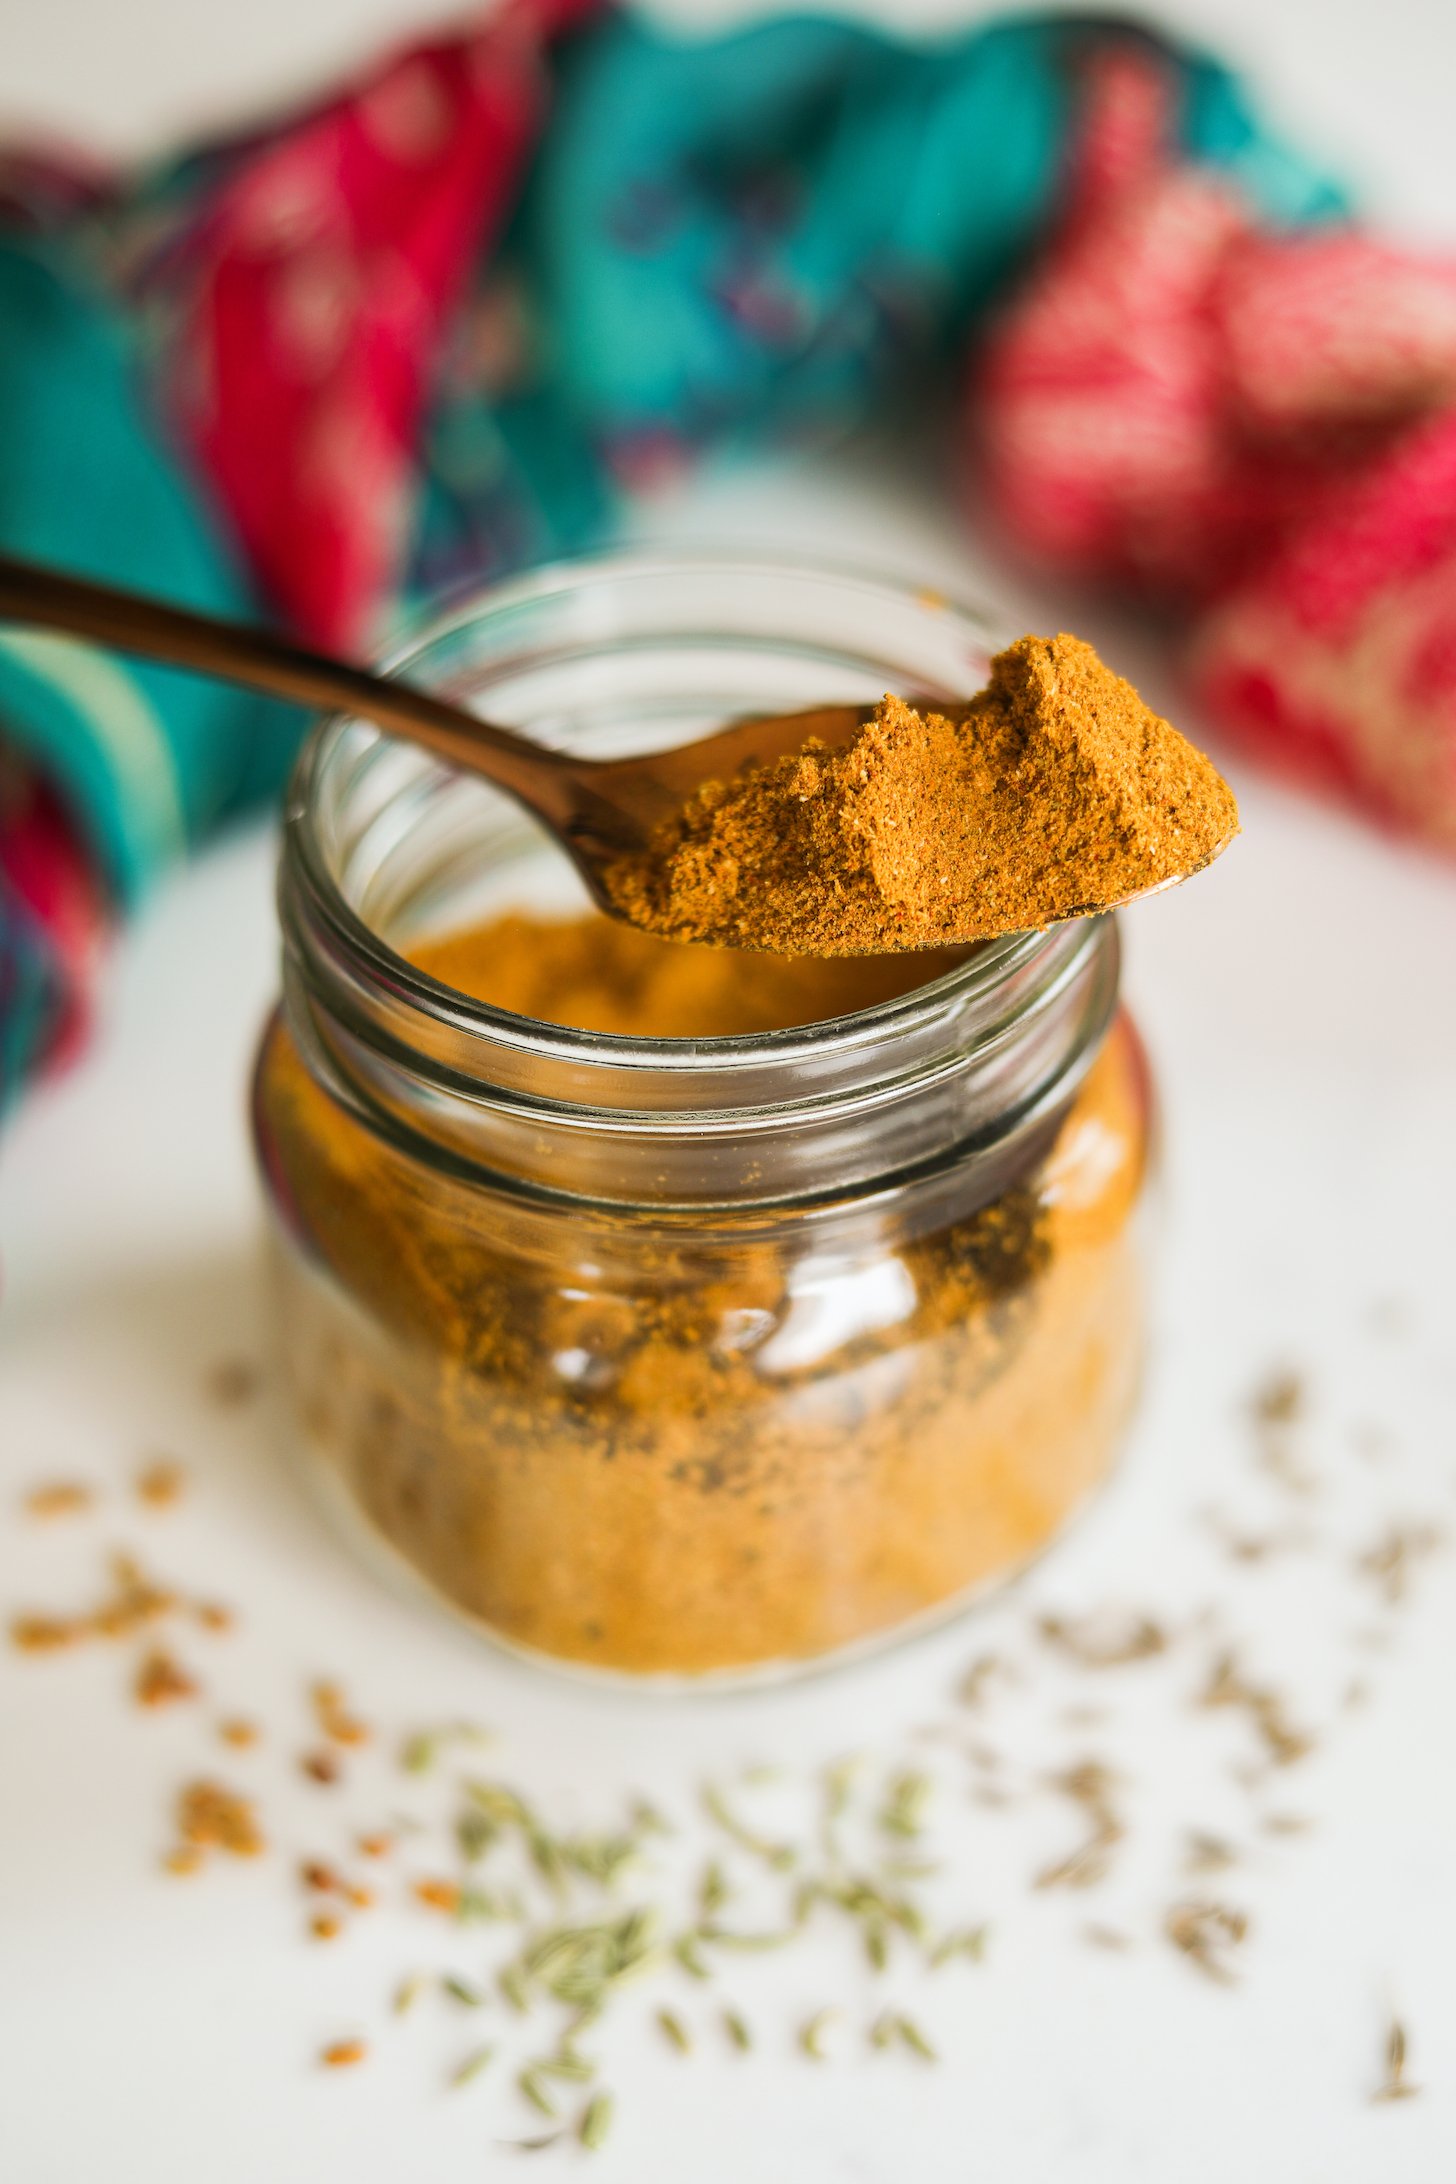 A heap-ful spoon of yellow spice powder sitting on a jar of ground spices with whole spices scattered close by.